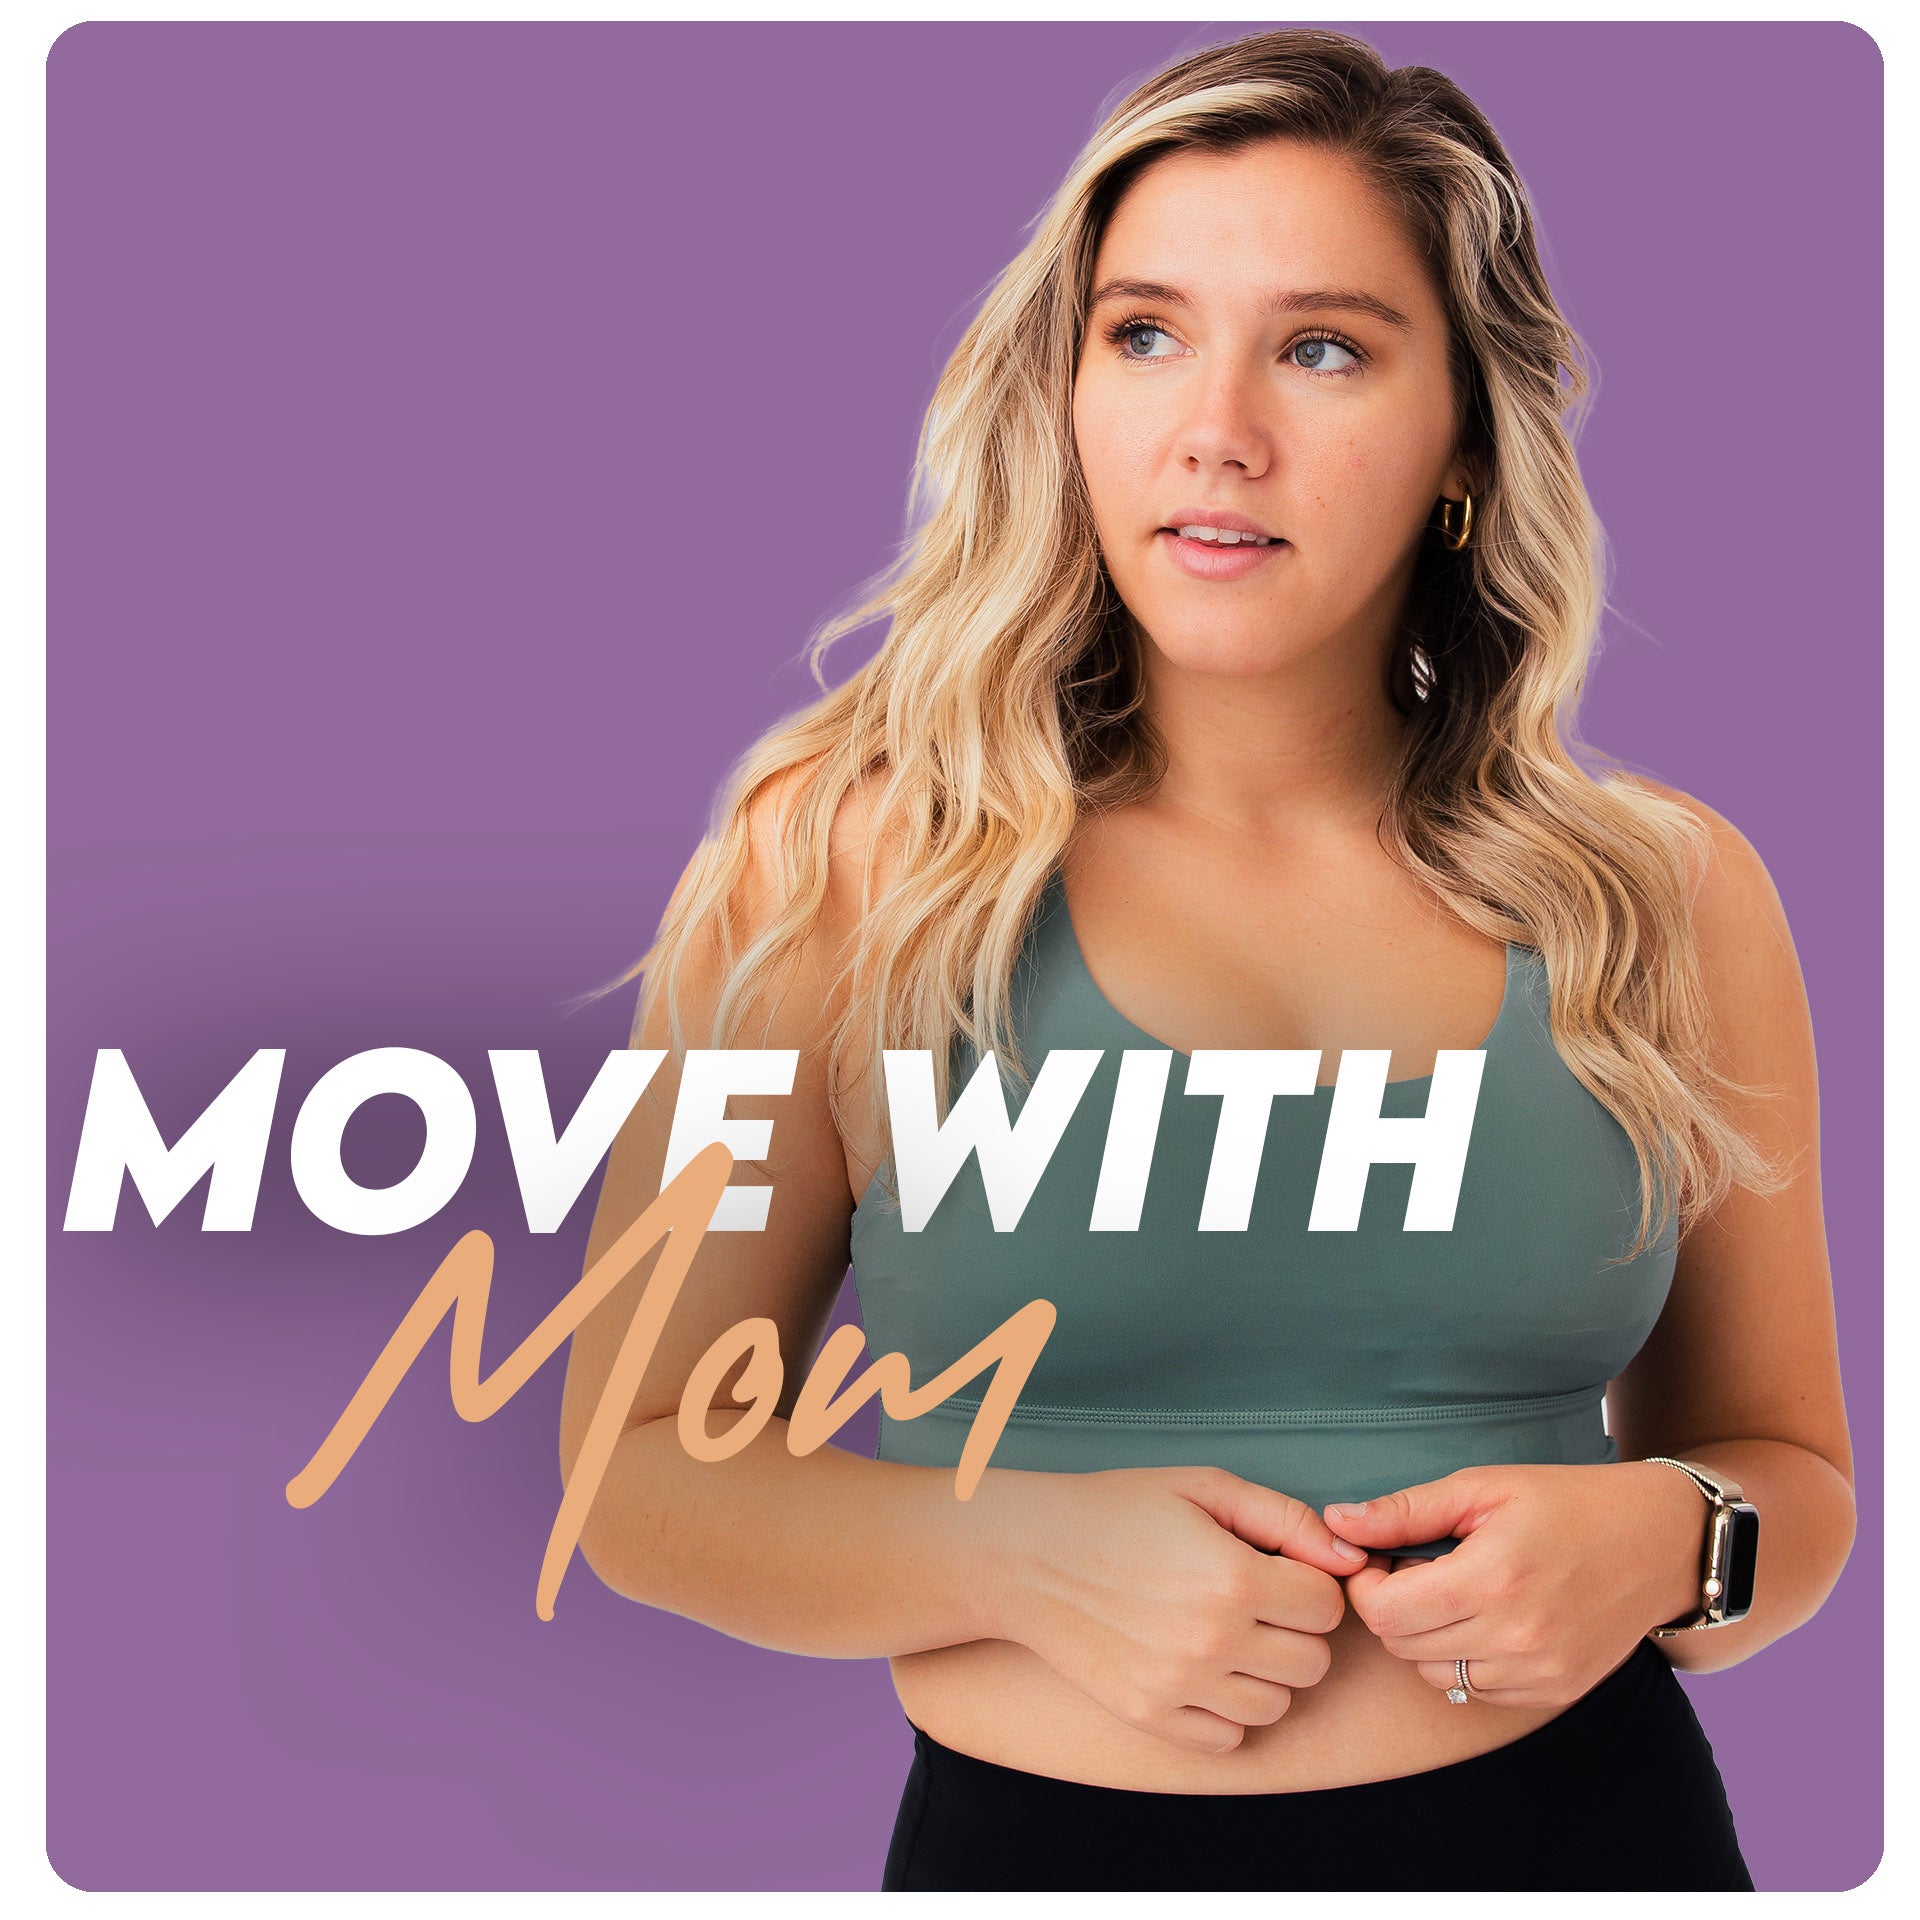 Move with Mom - 4 Week Guide